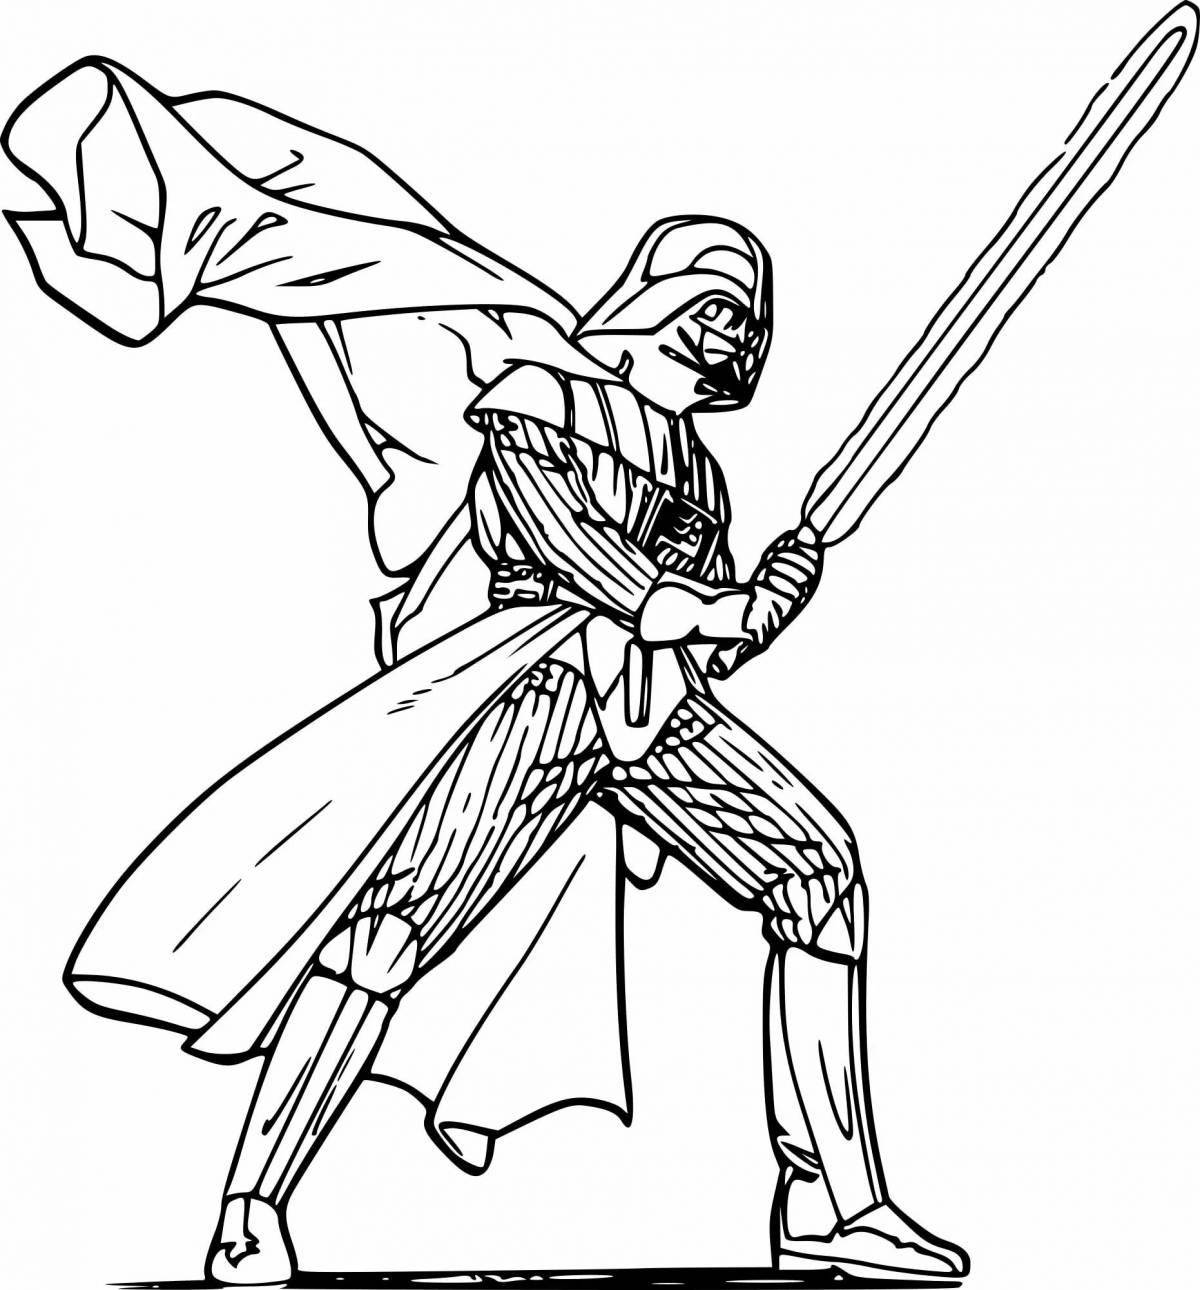 Coloring page shining jedi